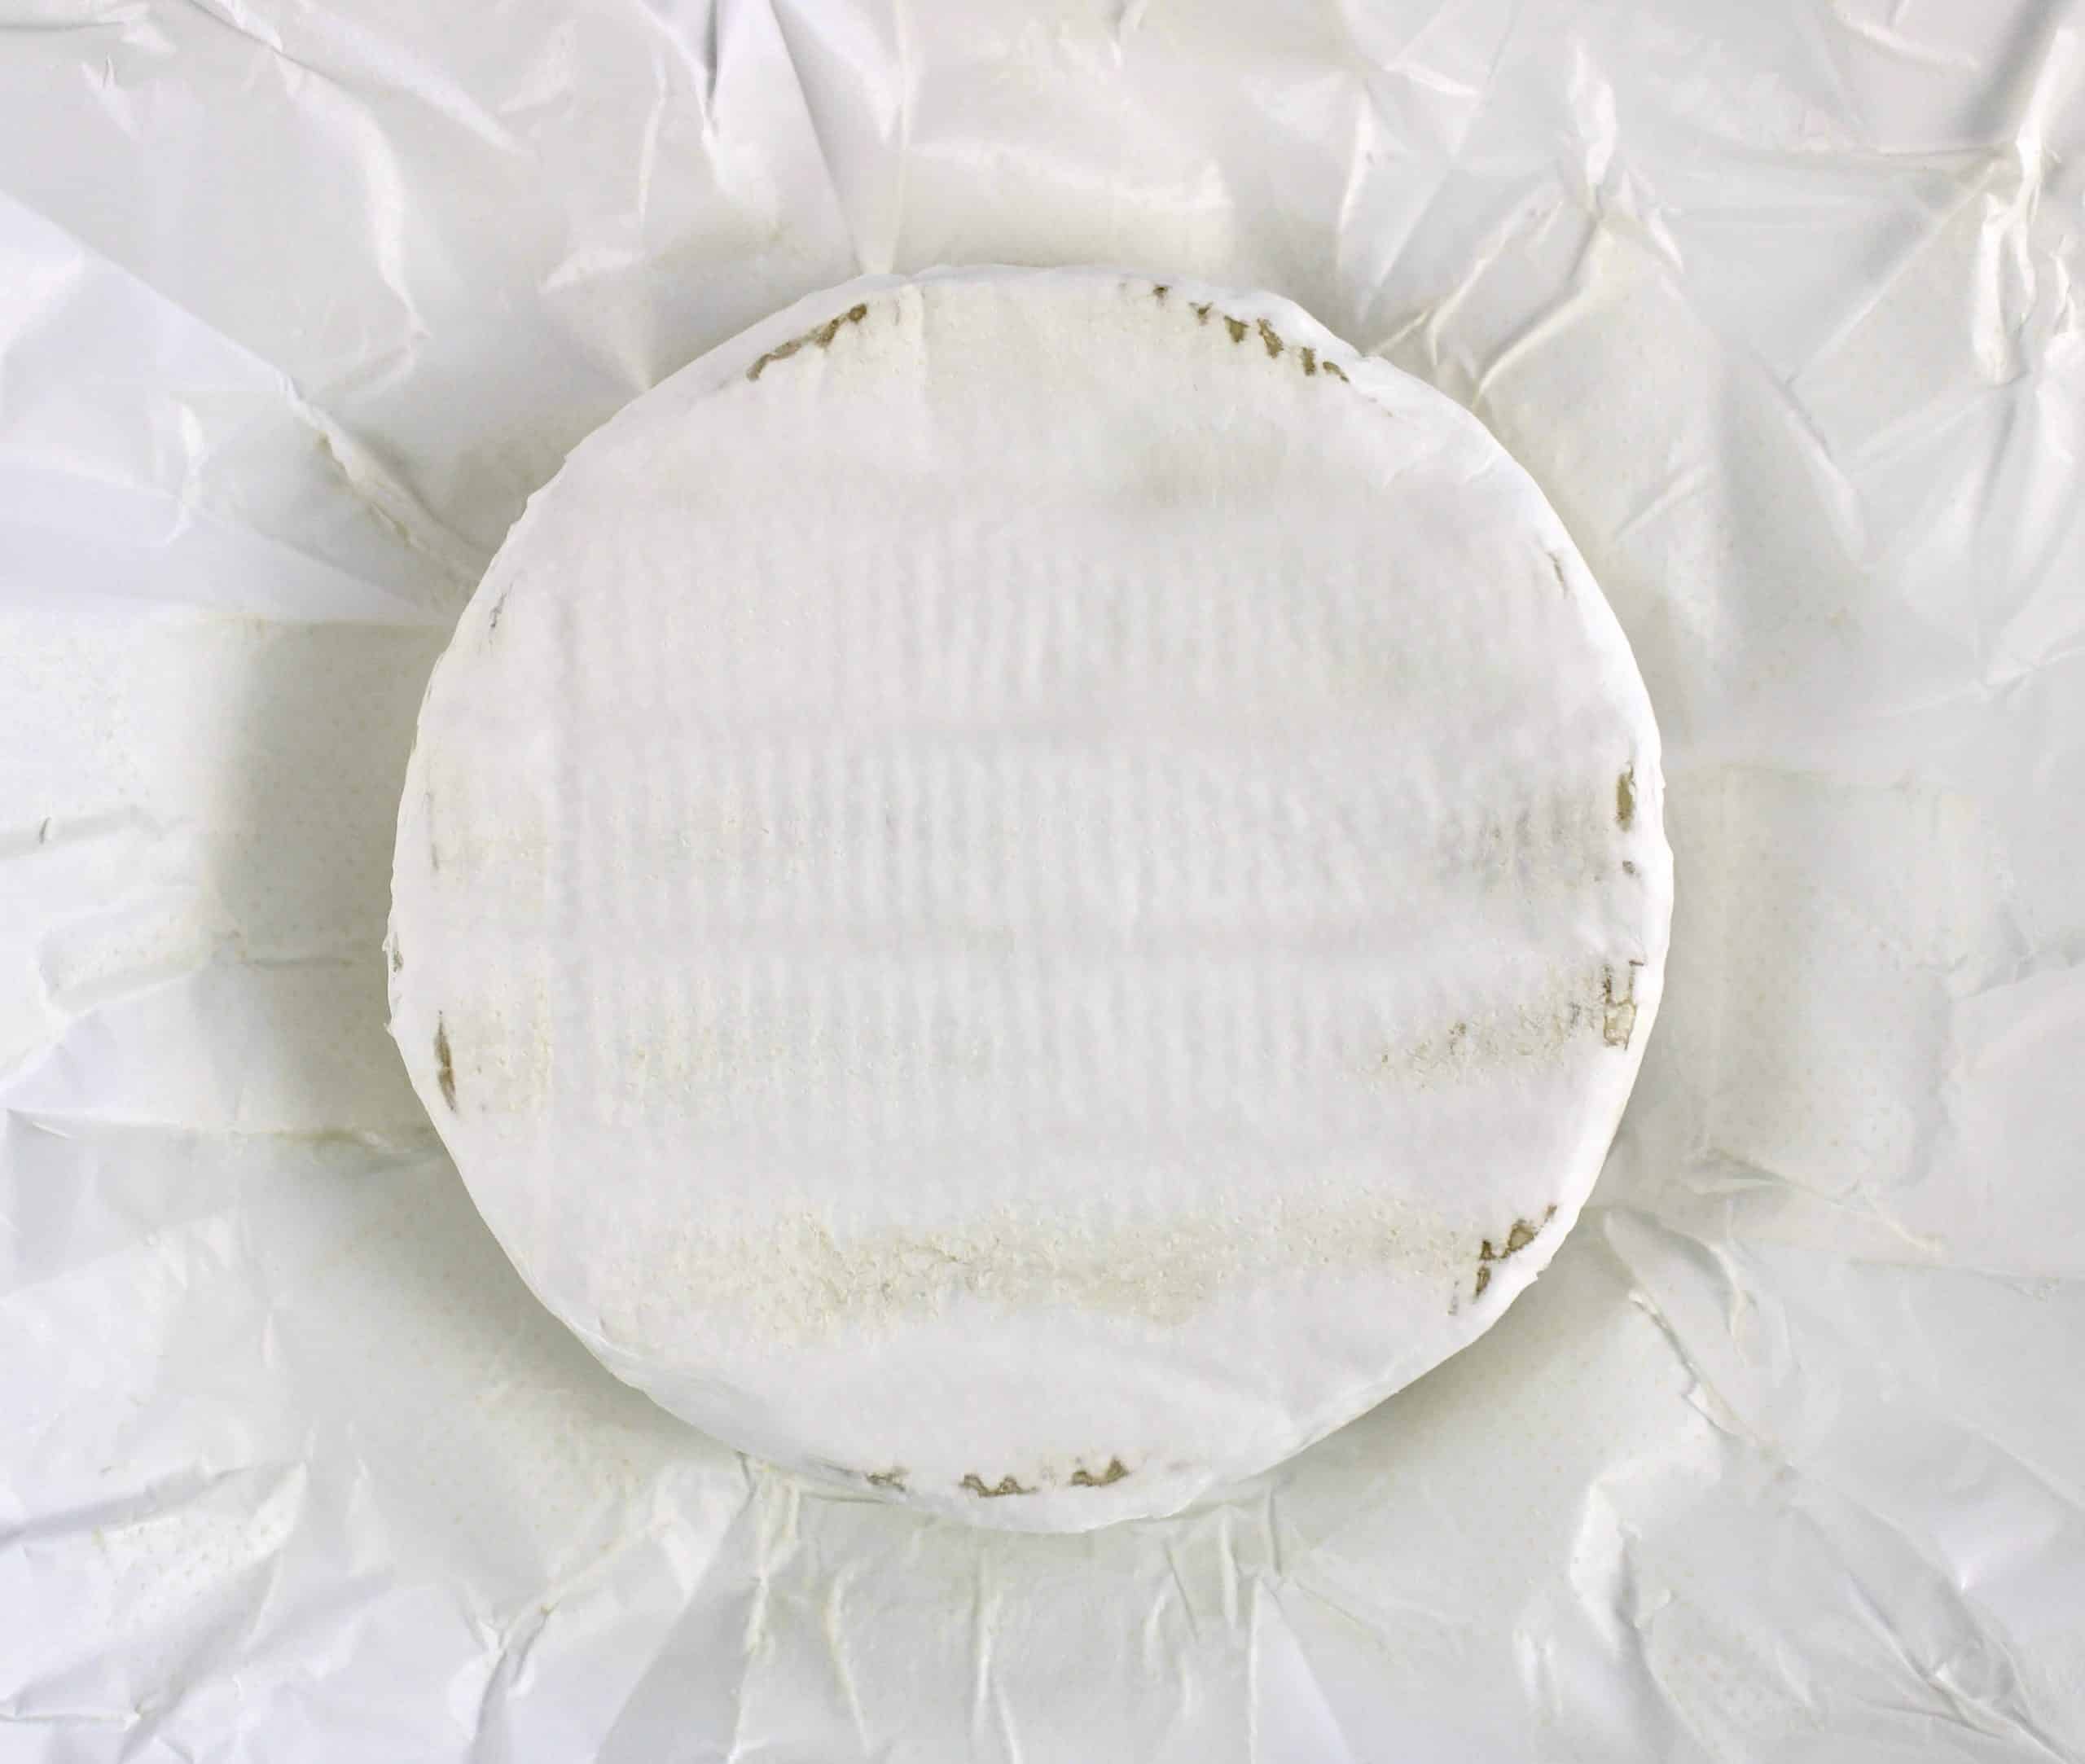 wheel of brie sitting on white wrapper